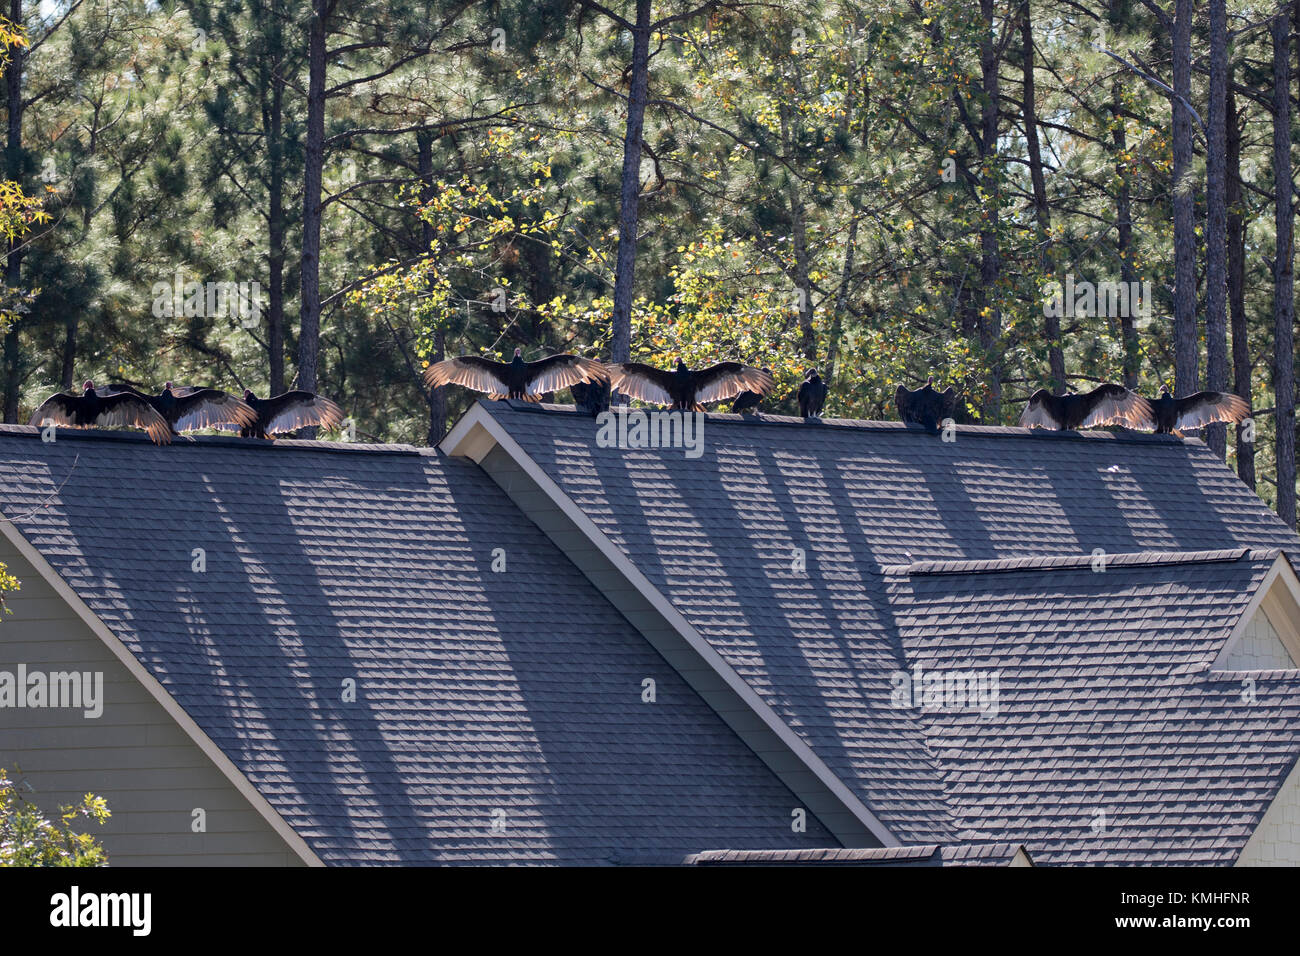 Turkey buzzards sunning and preening themselves on the roofline of a house. Stock Photo